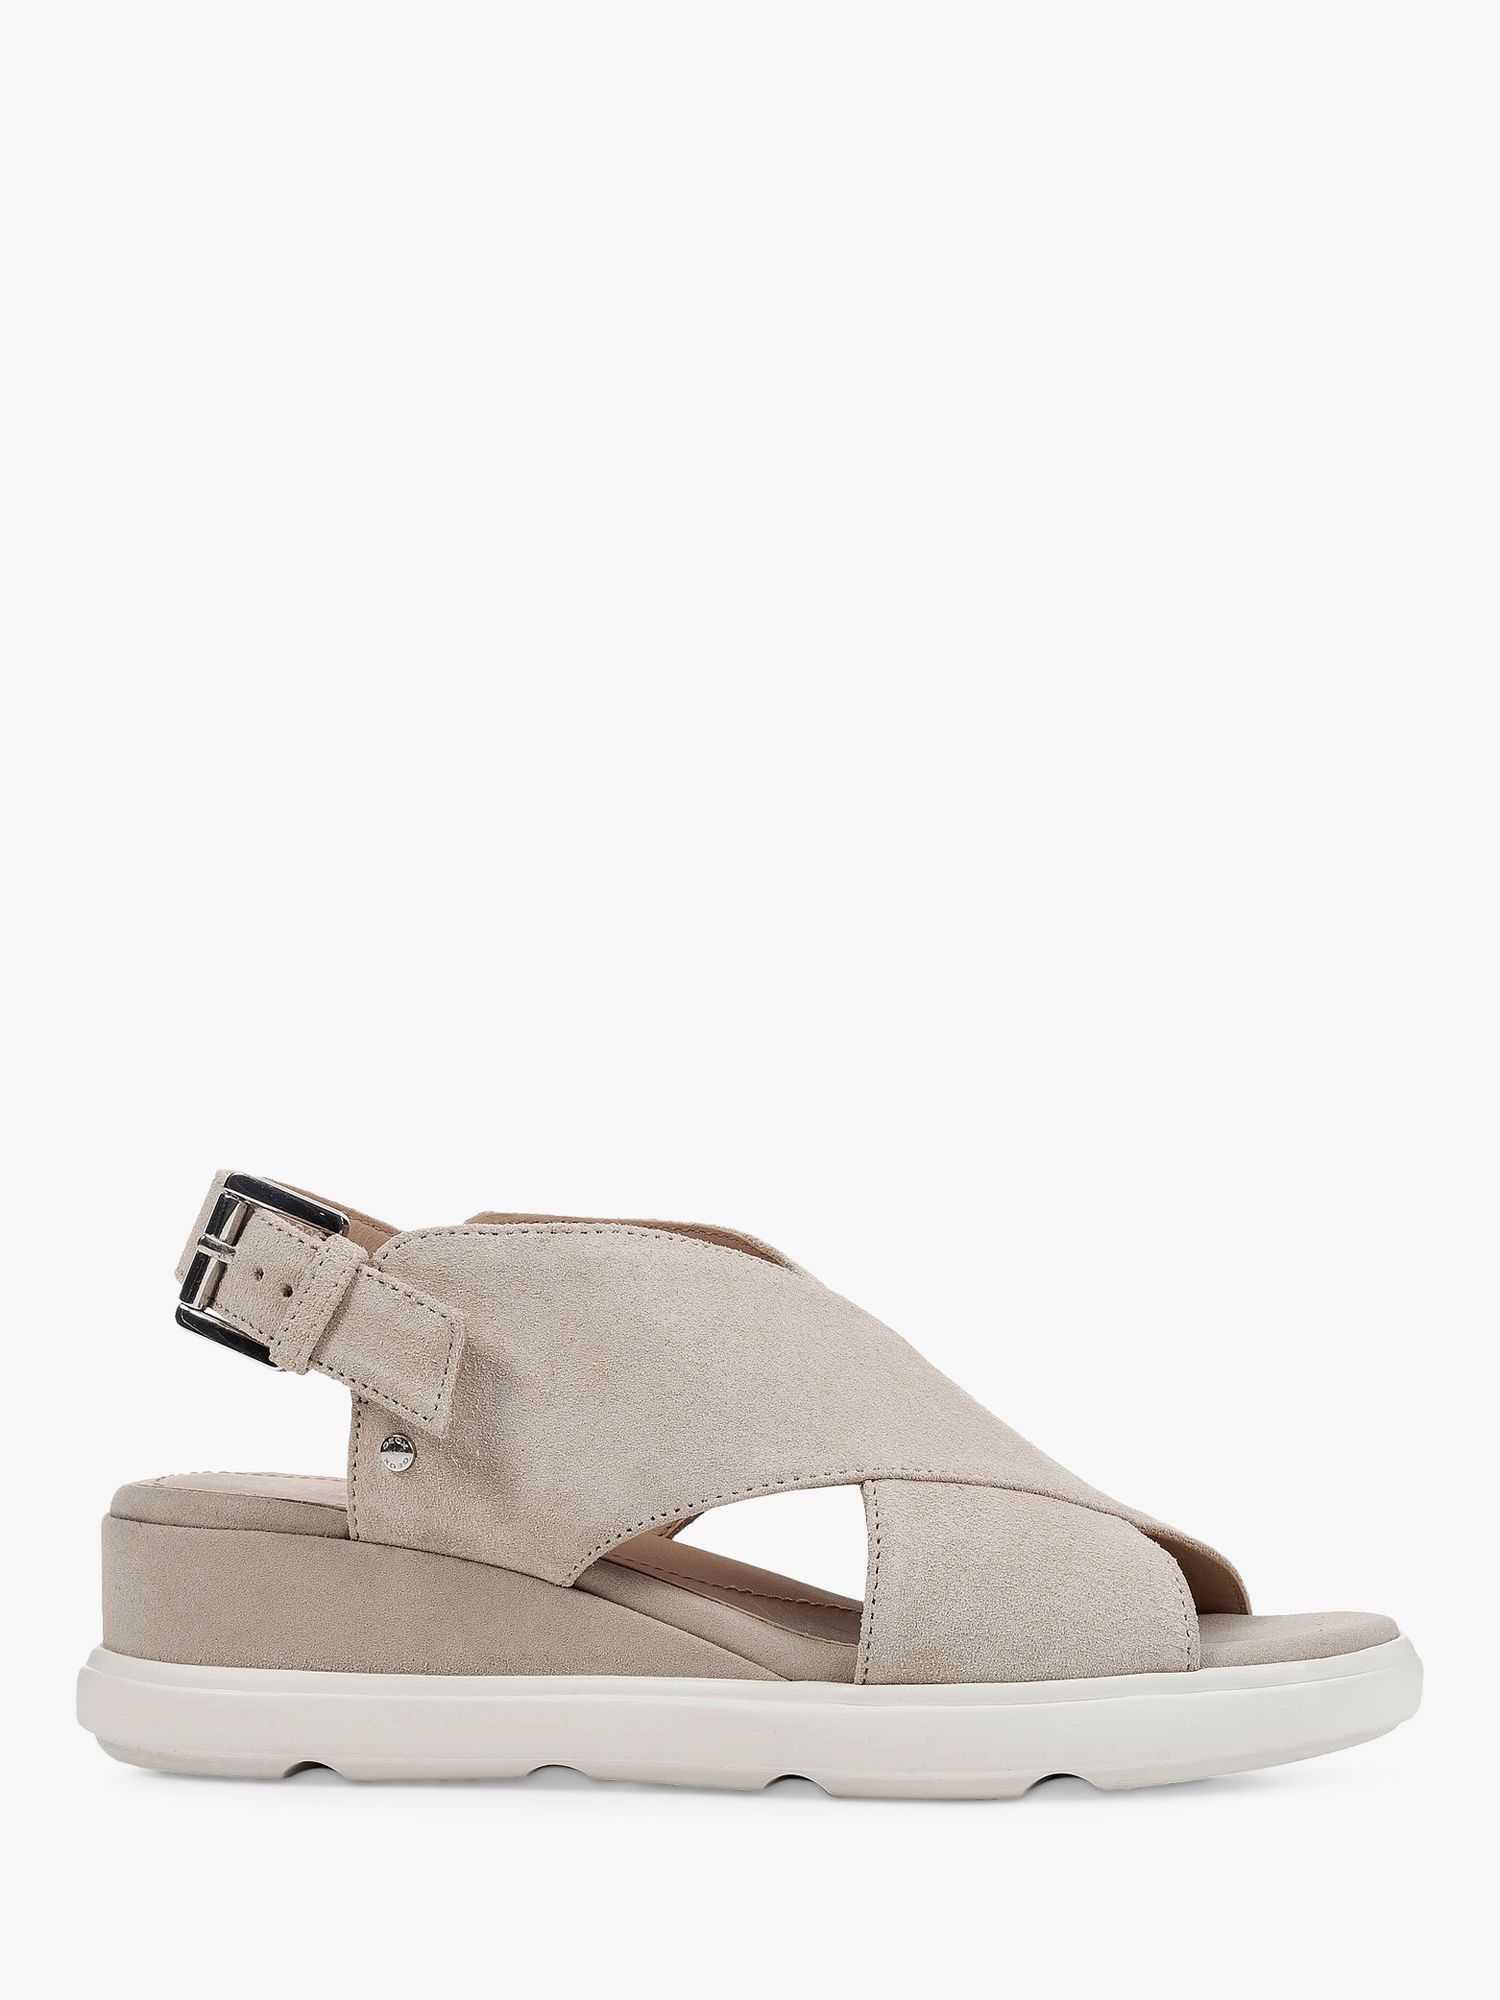 Pisa Wide Fit Wedge Sandals, Taupe 